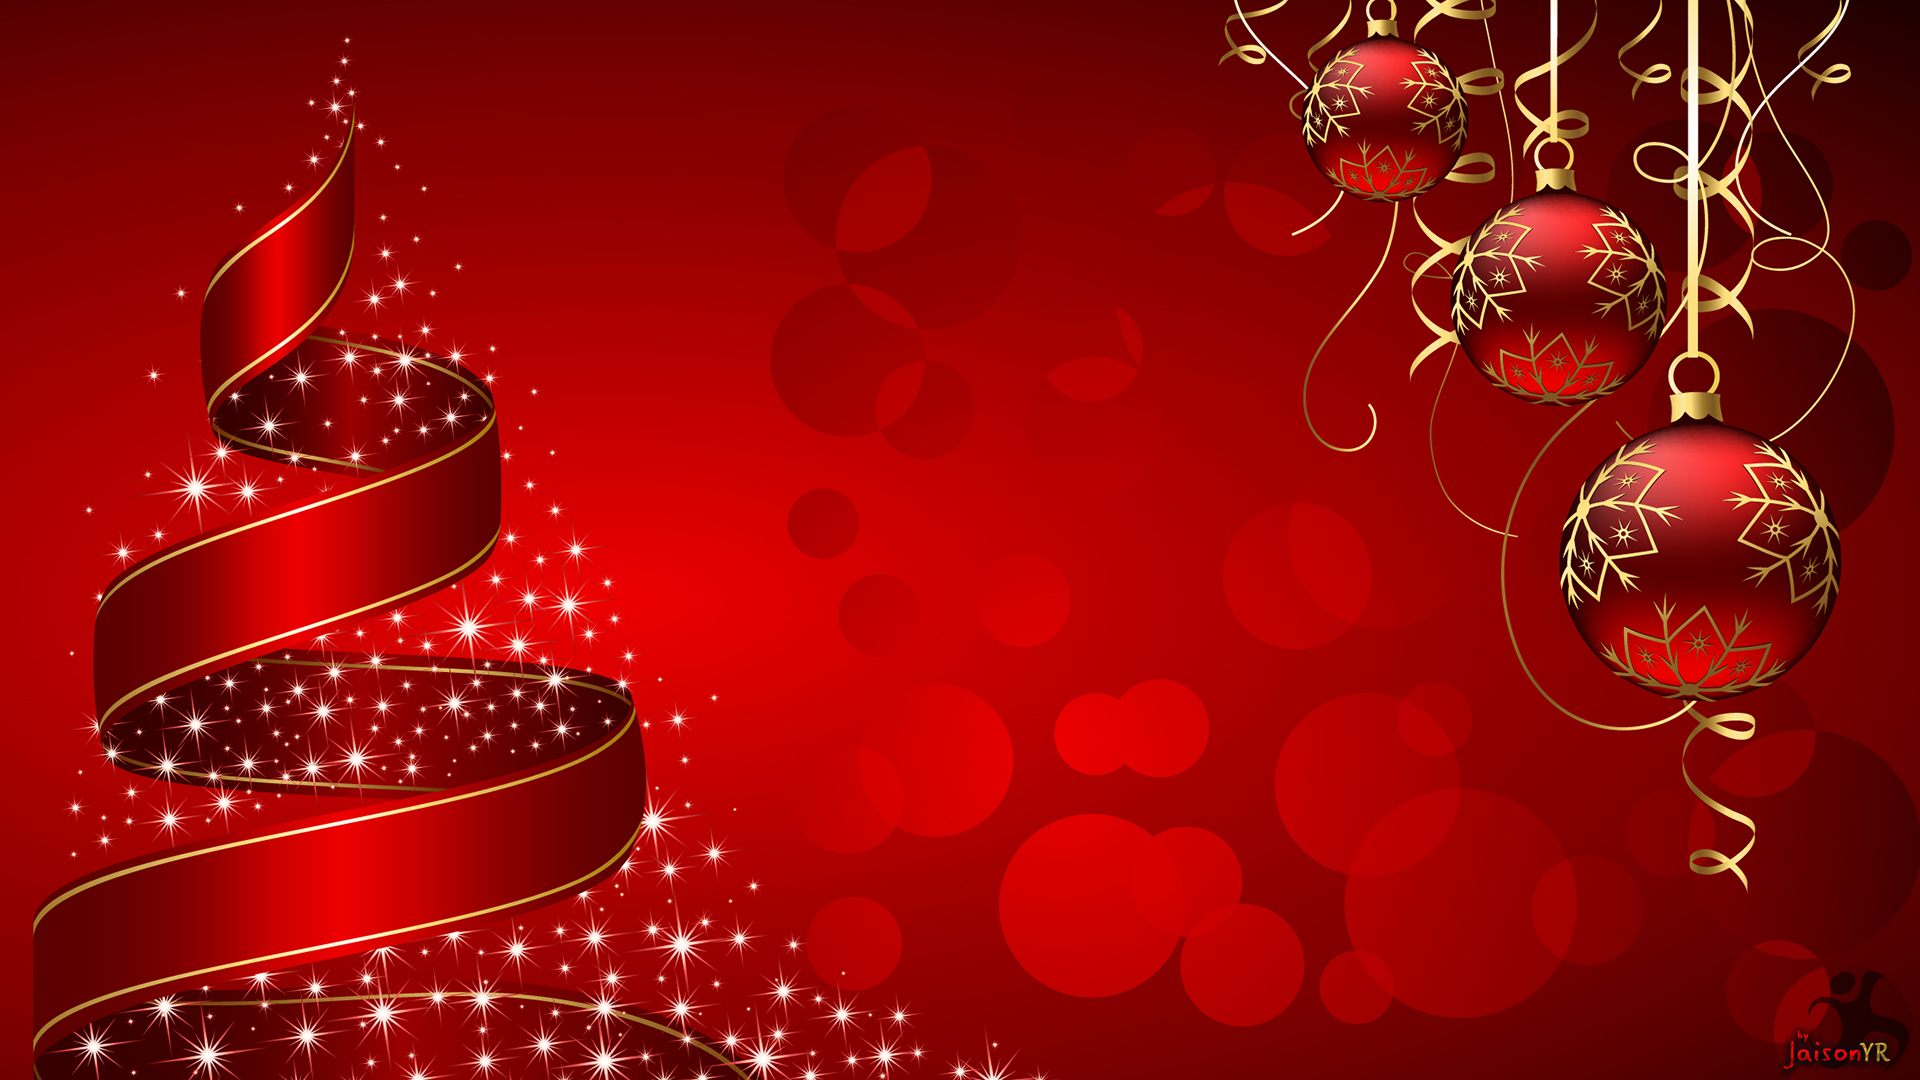 Christmas Tree Wallpaper Load All Image Sweetpeafx Featured By